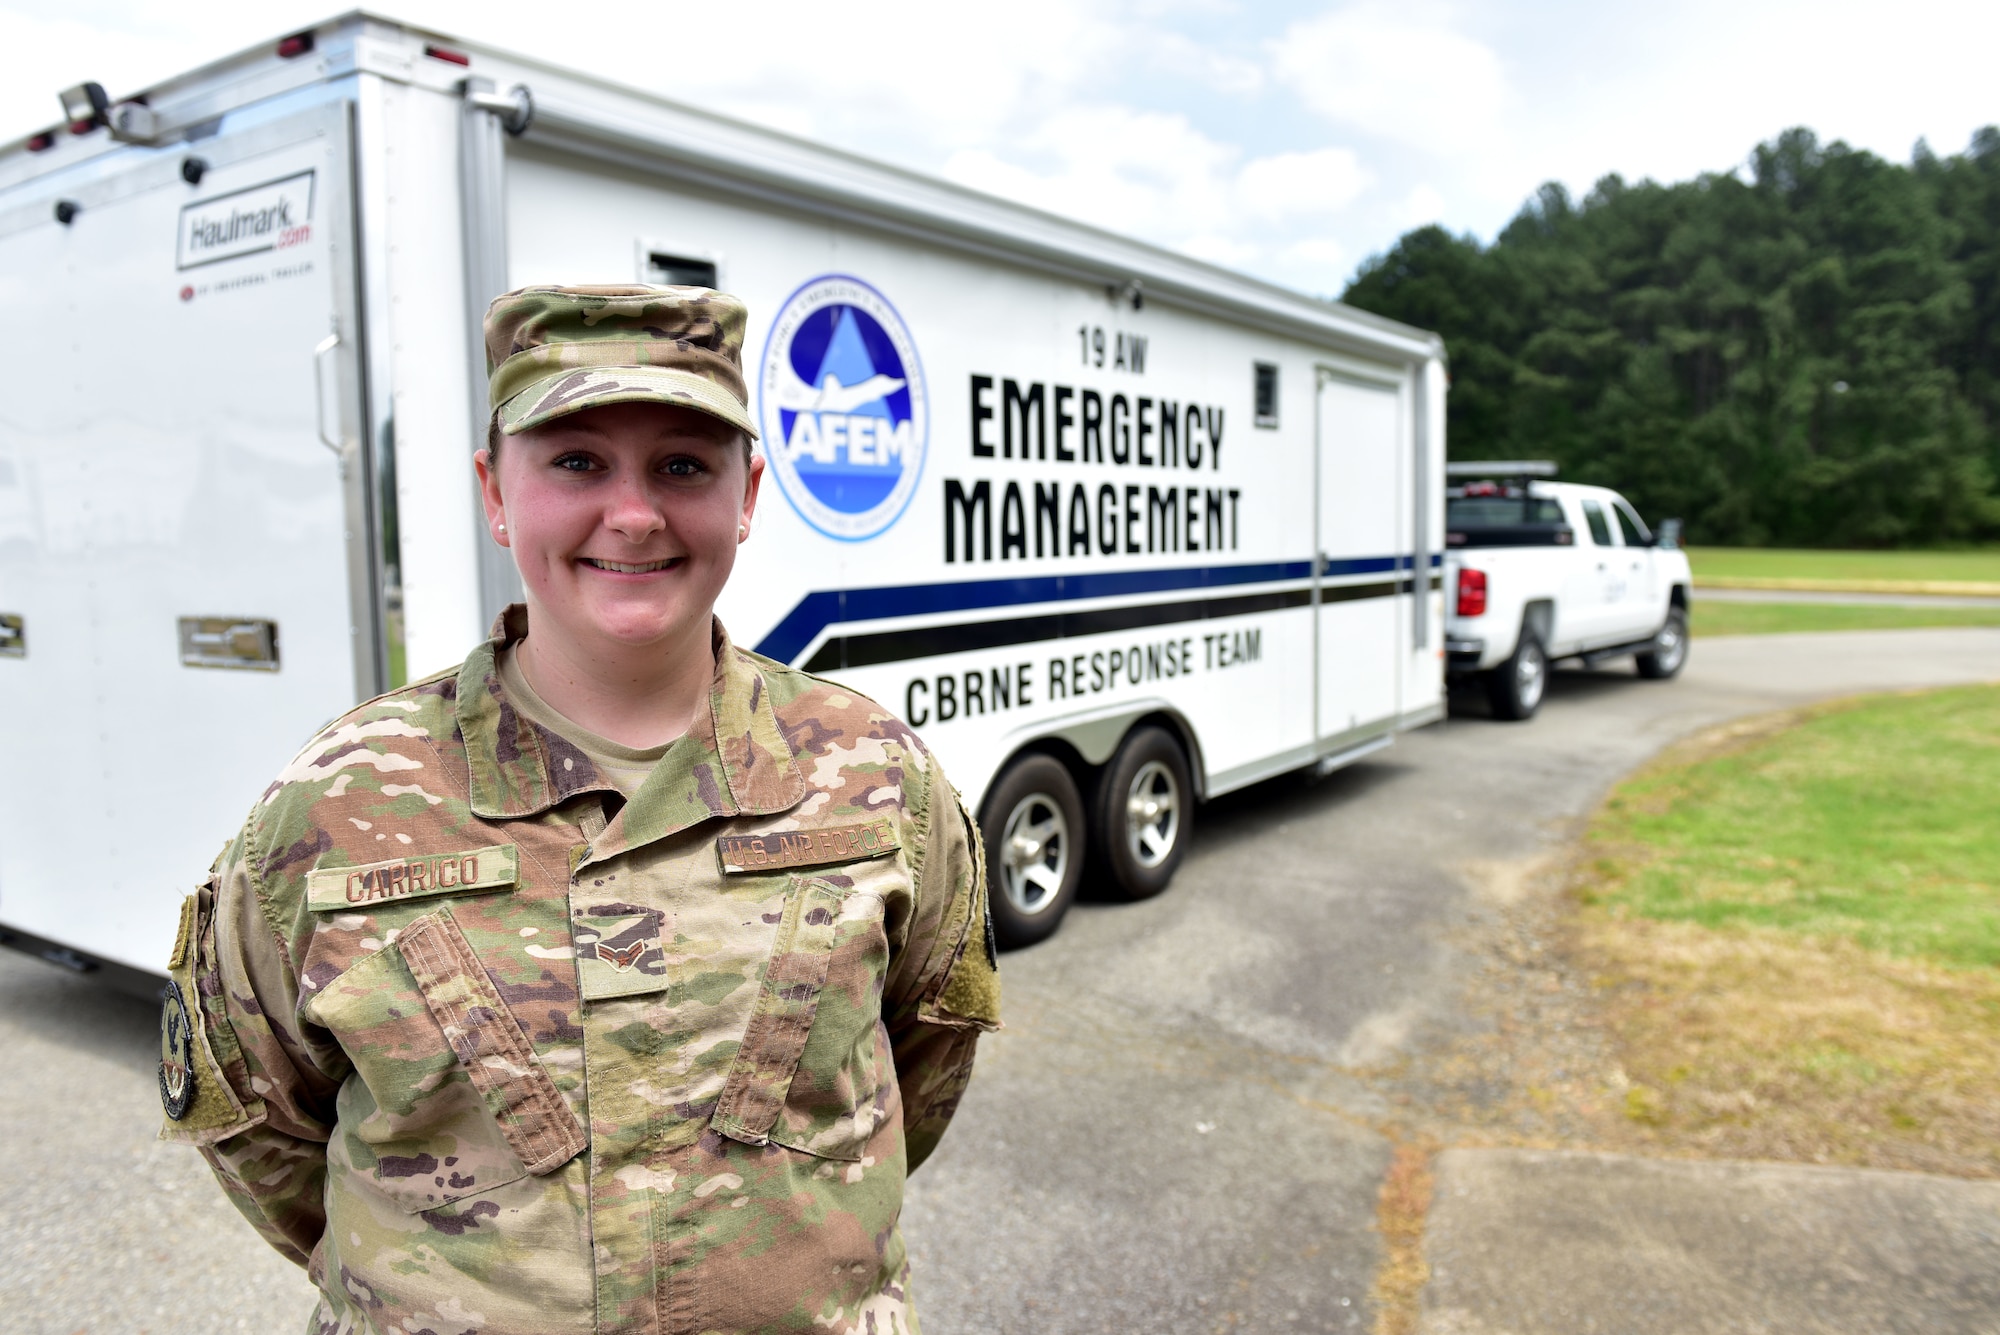 A woman in the operational camouflage pattern uniform stands in front of a truck with the words "Emergency Management" painted on the side.